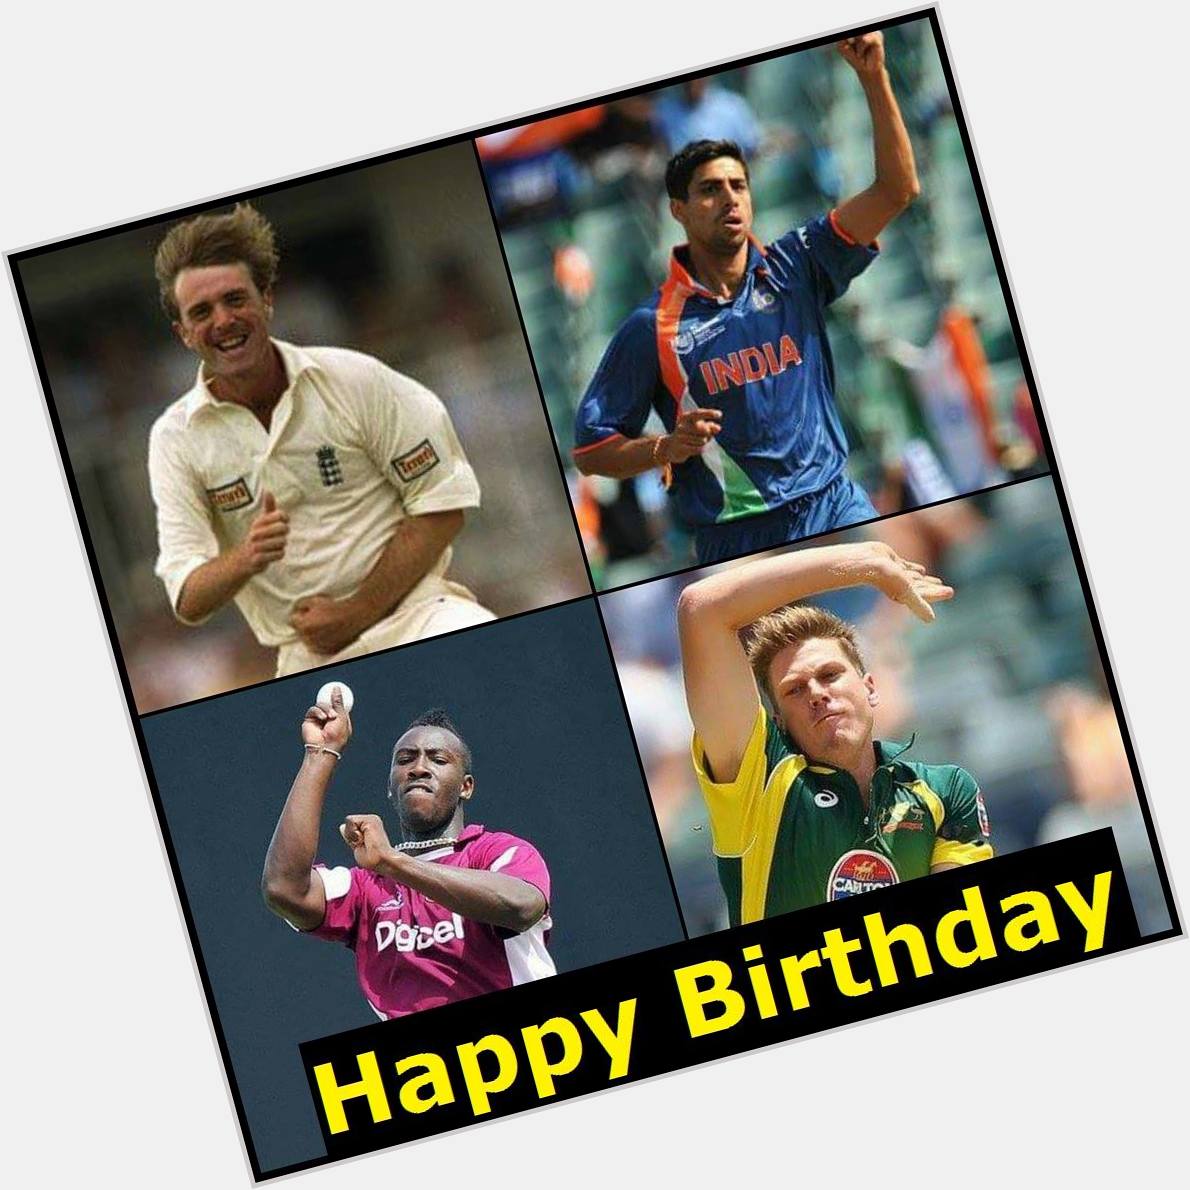 Happy Birthday to Ashish Nehra, Andre Russell, James Faulkner and Phil Tufnell. 